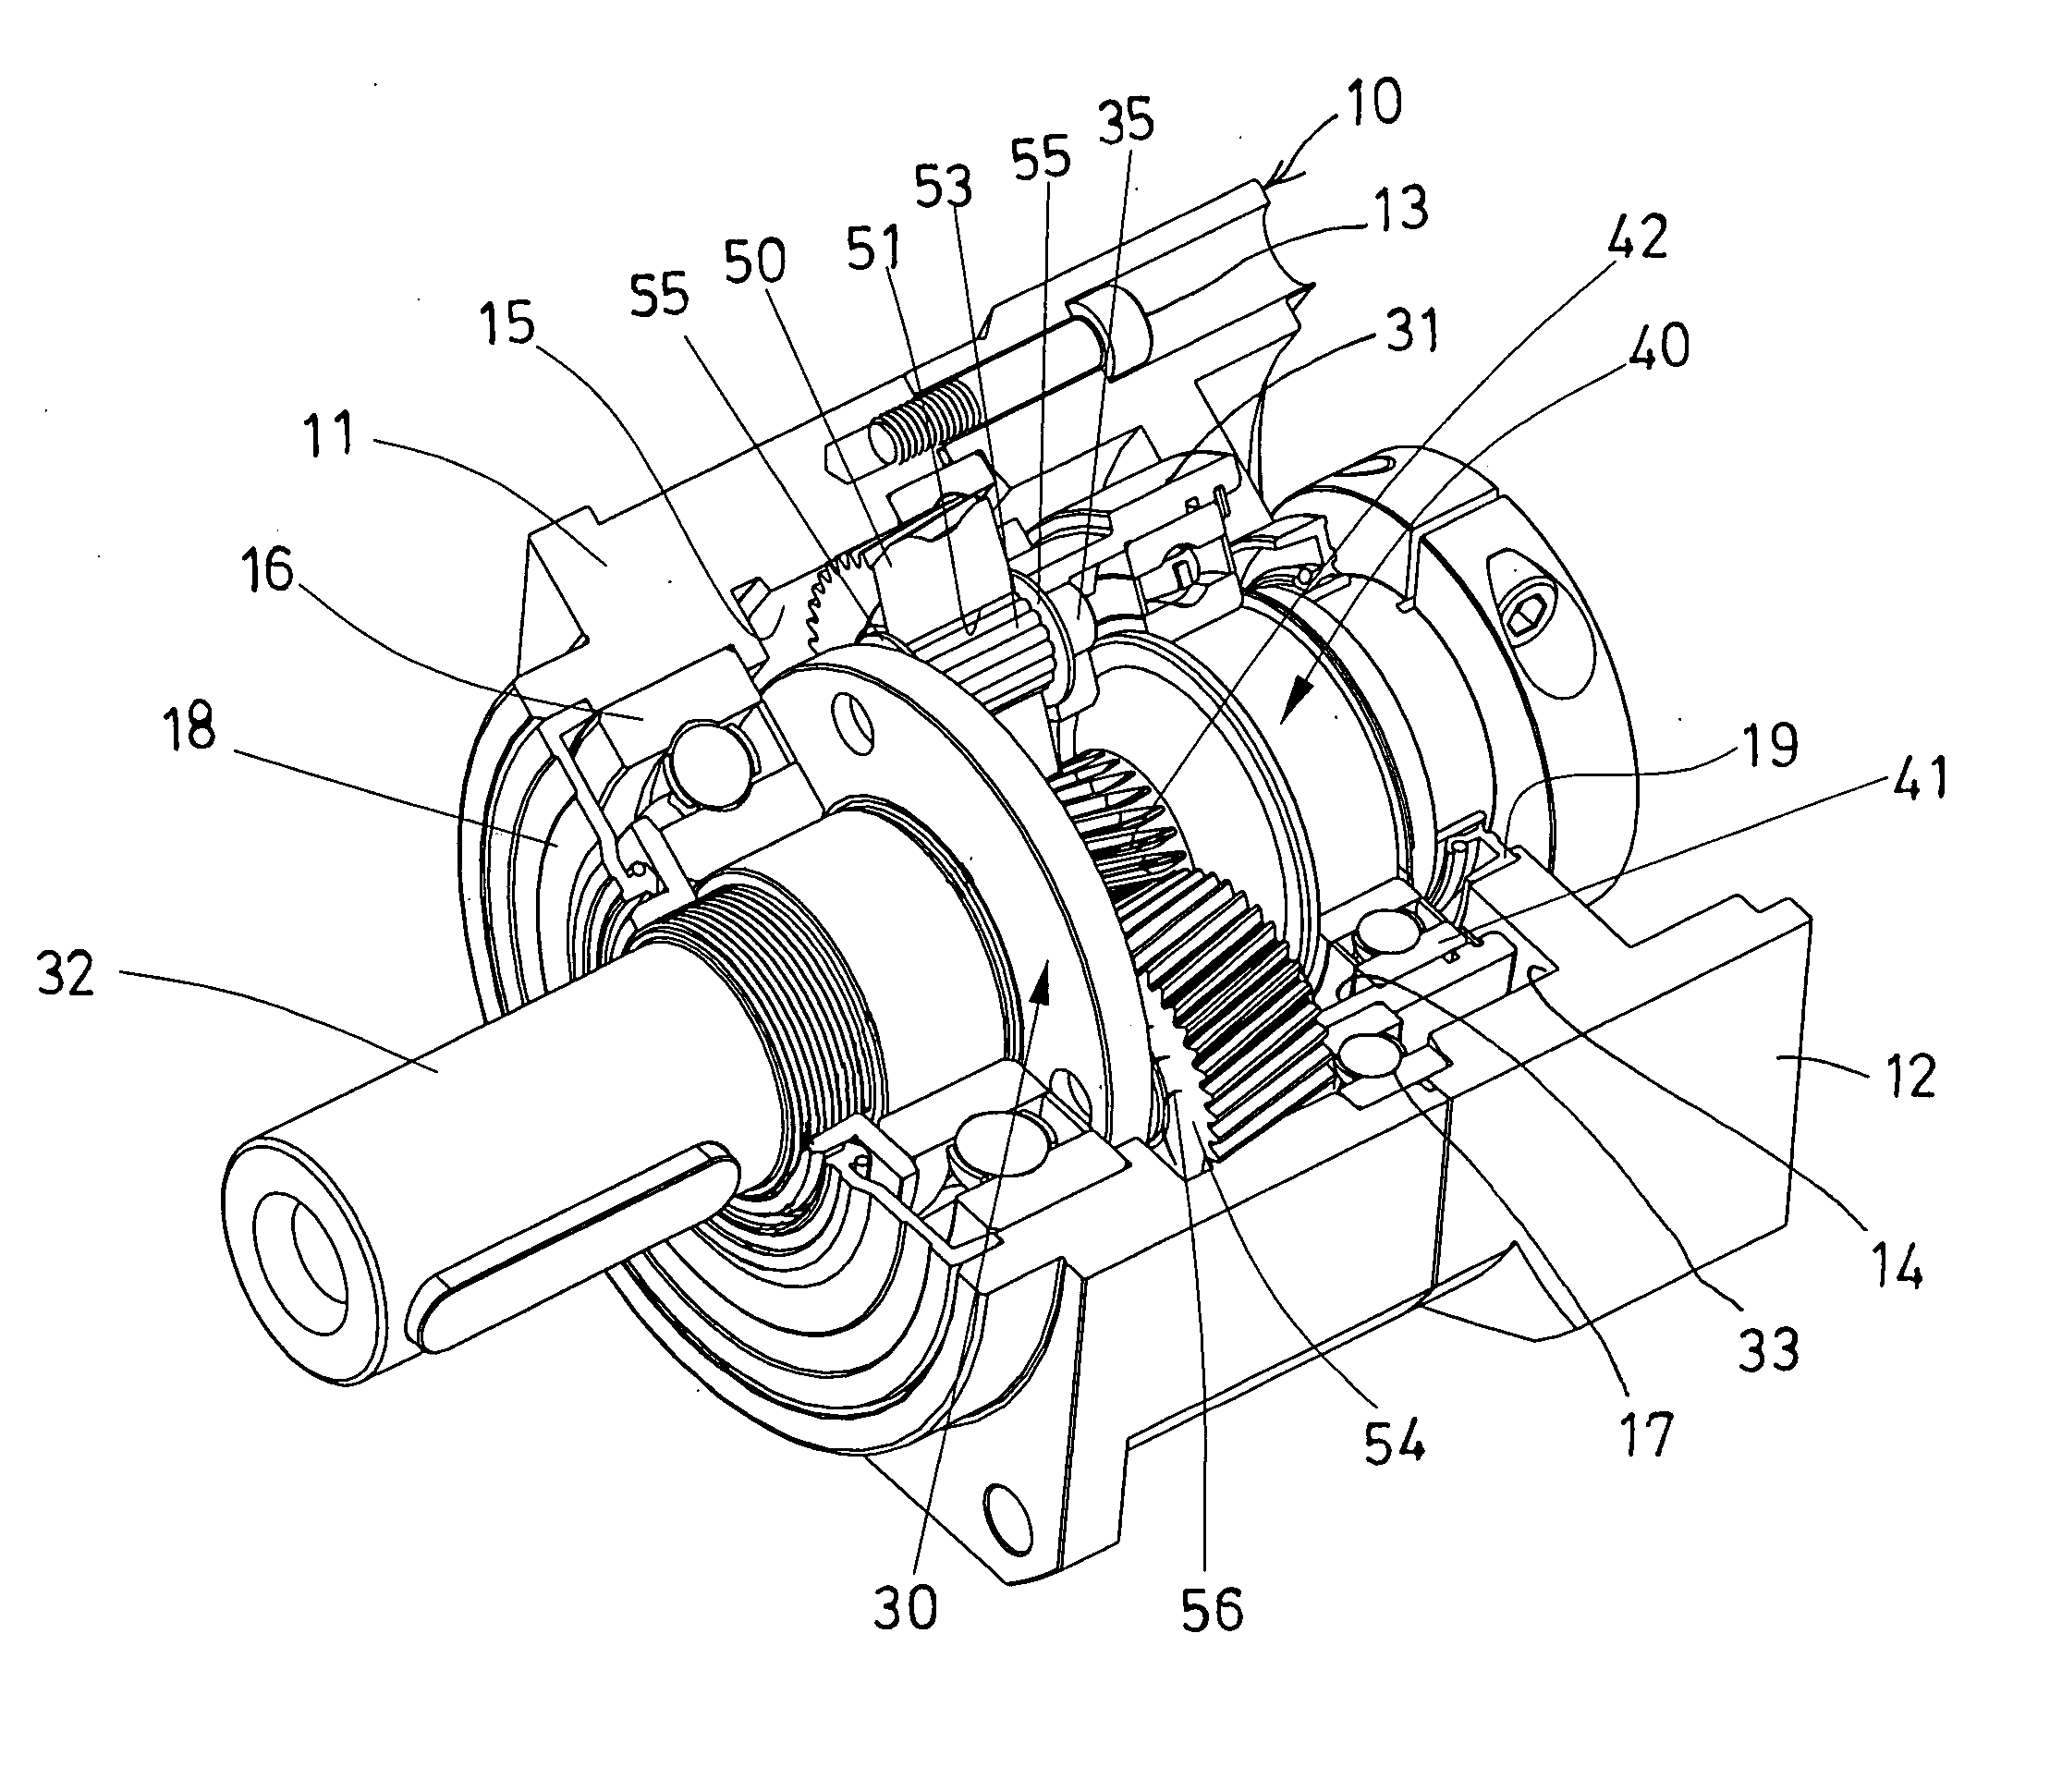 Planetary gear device for reduction gearing